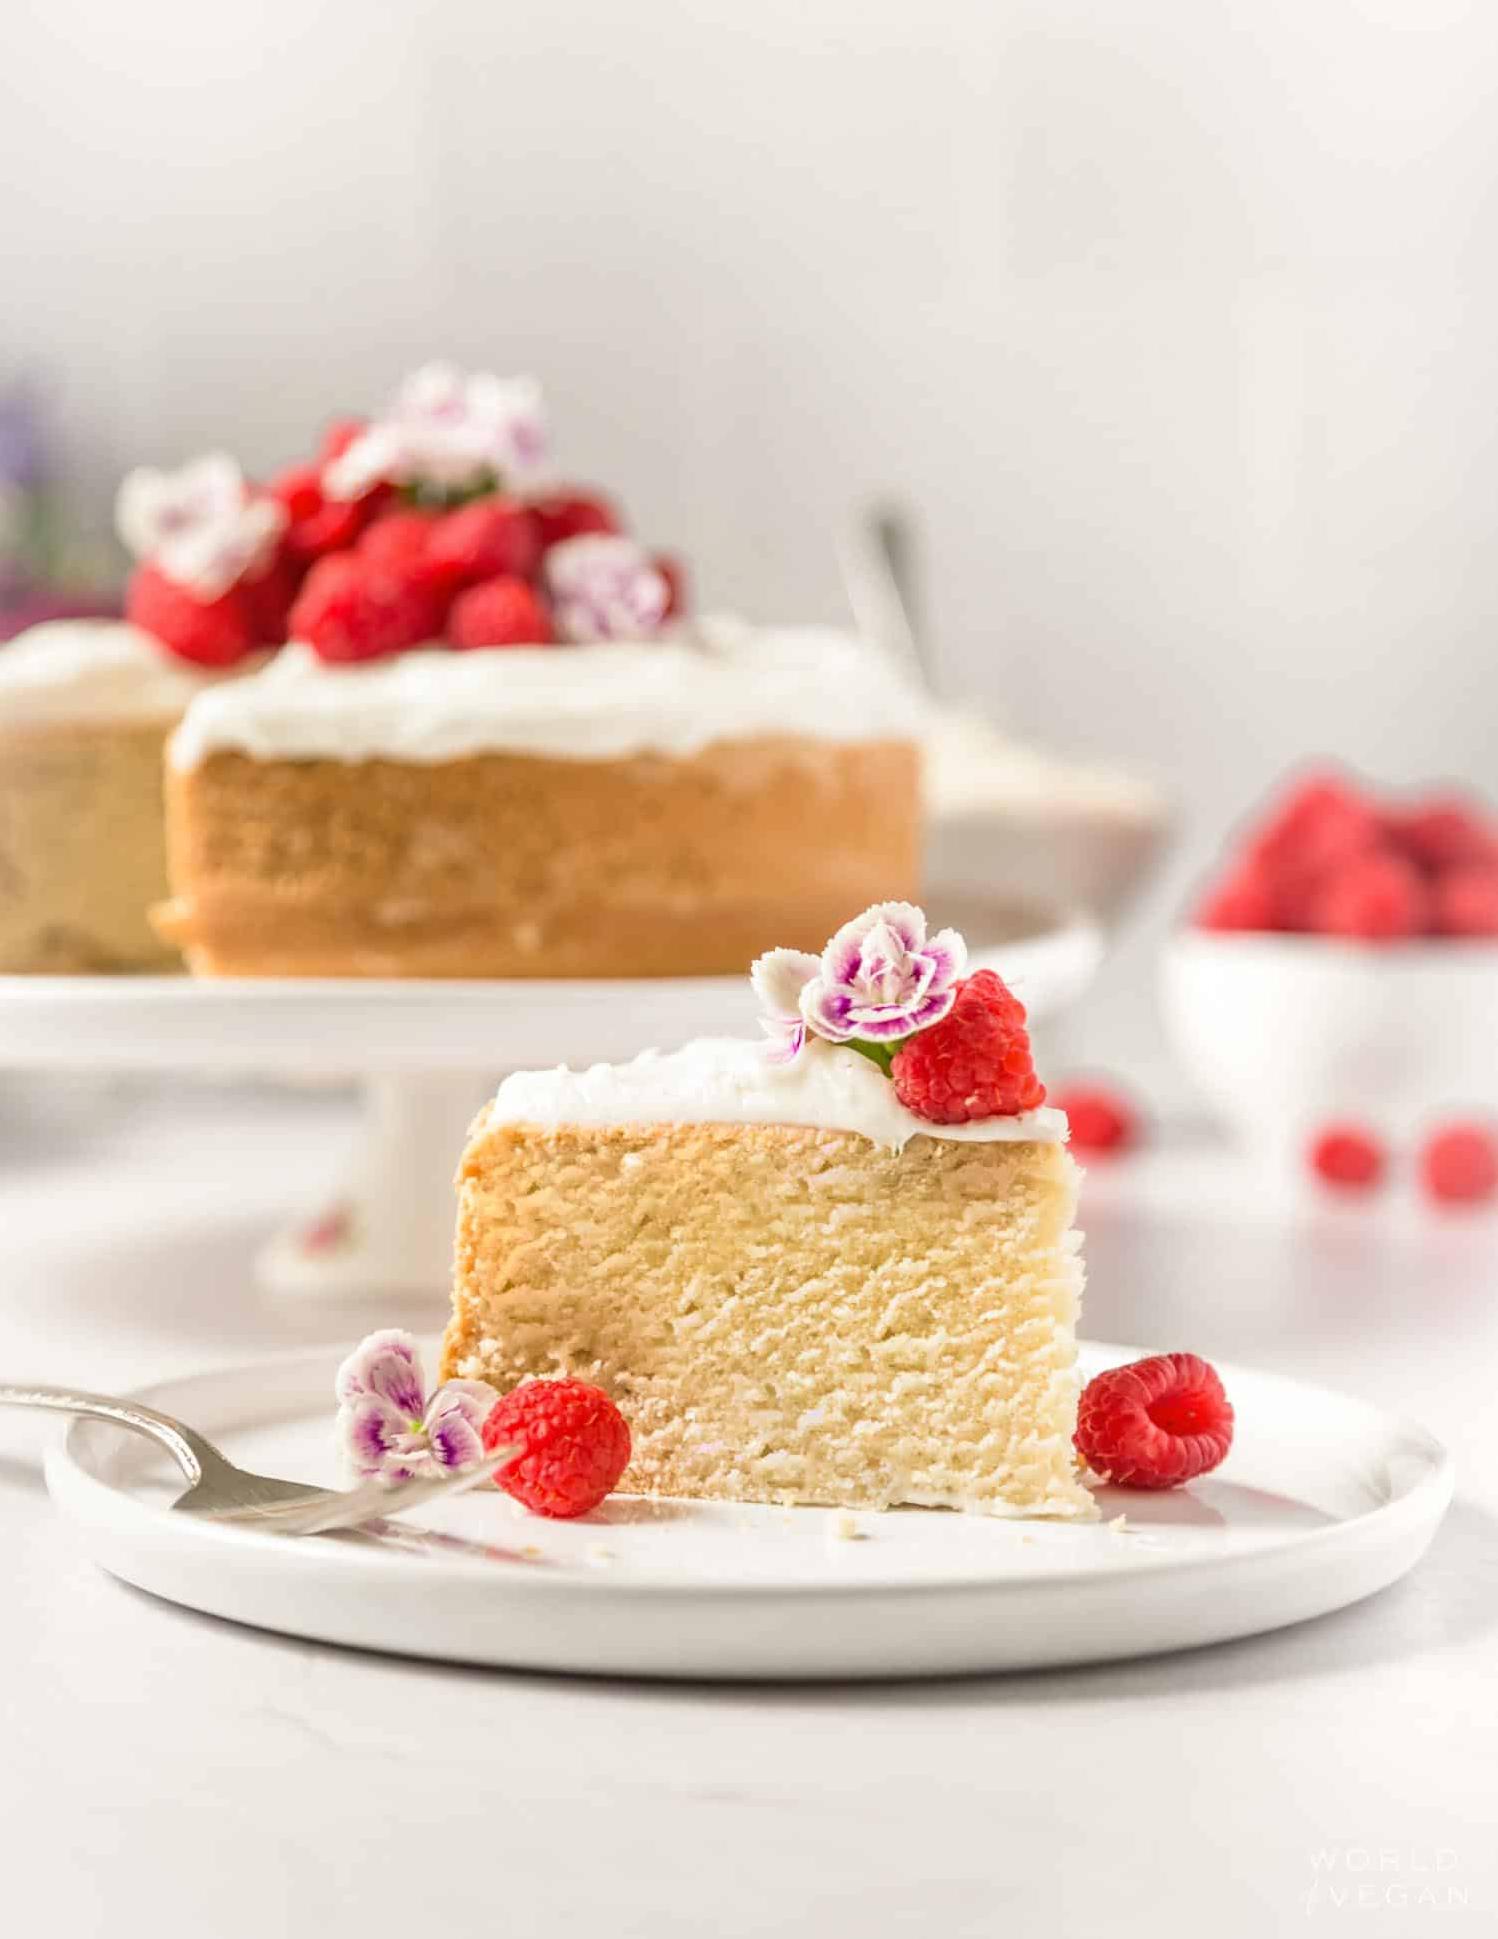  Whether you're cutting out dairy or not, this cake is a must-try recipe